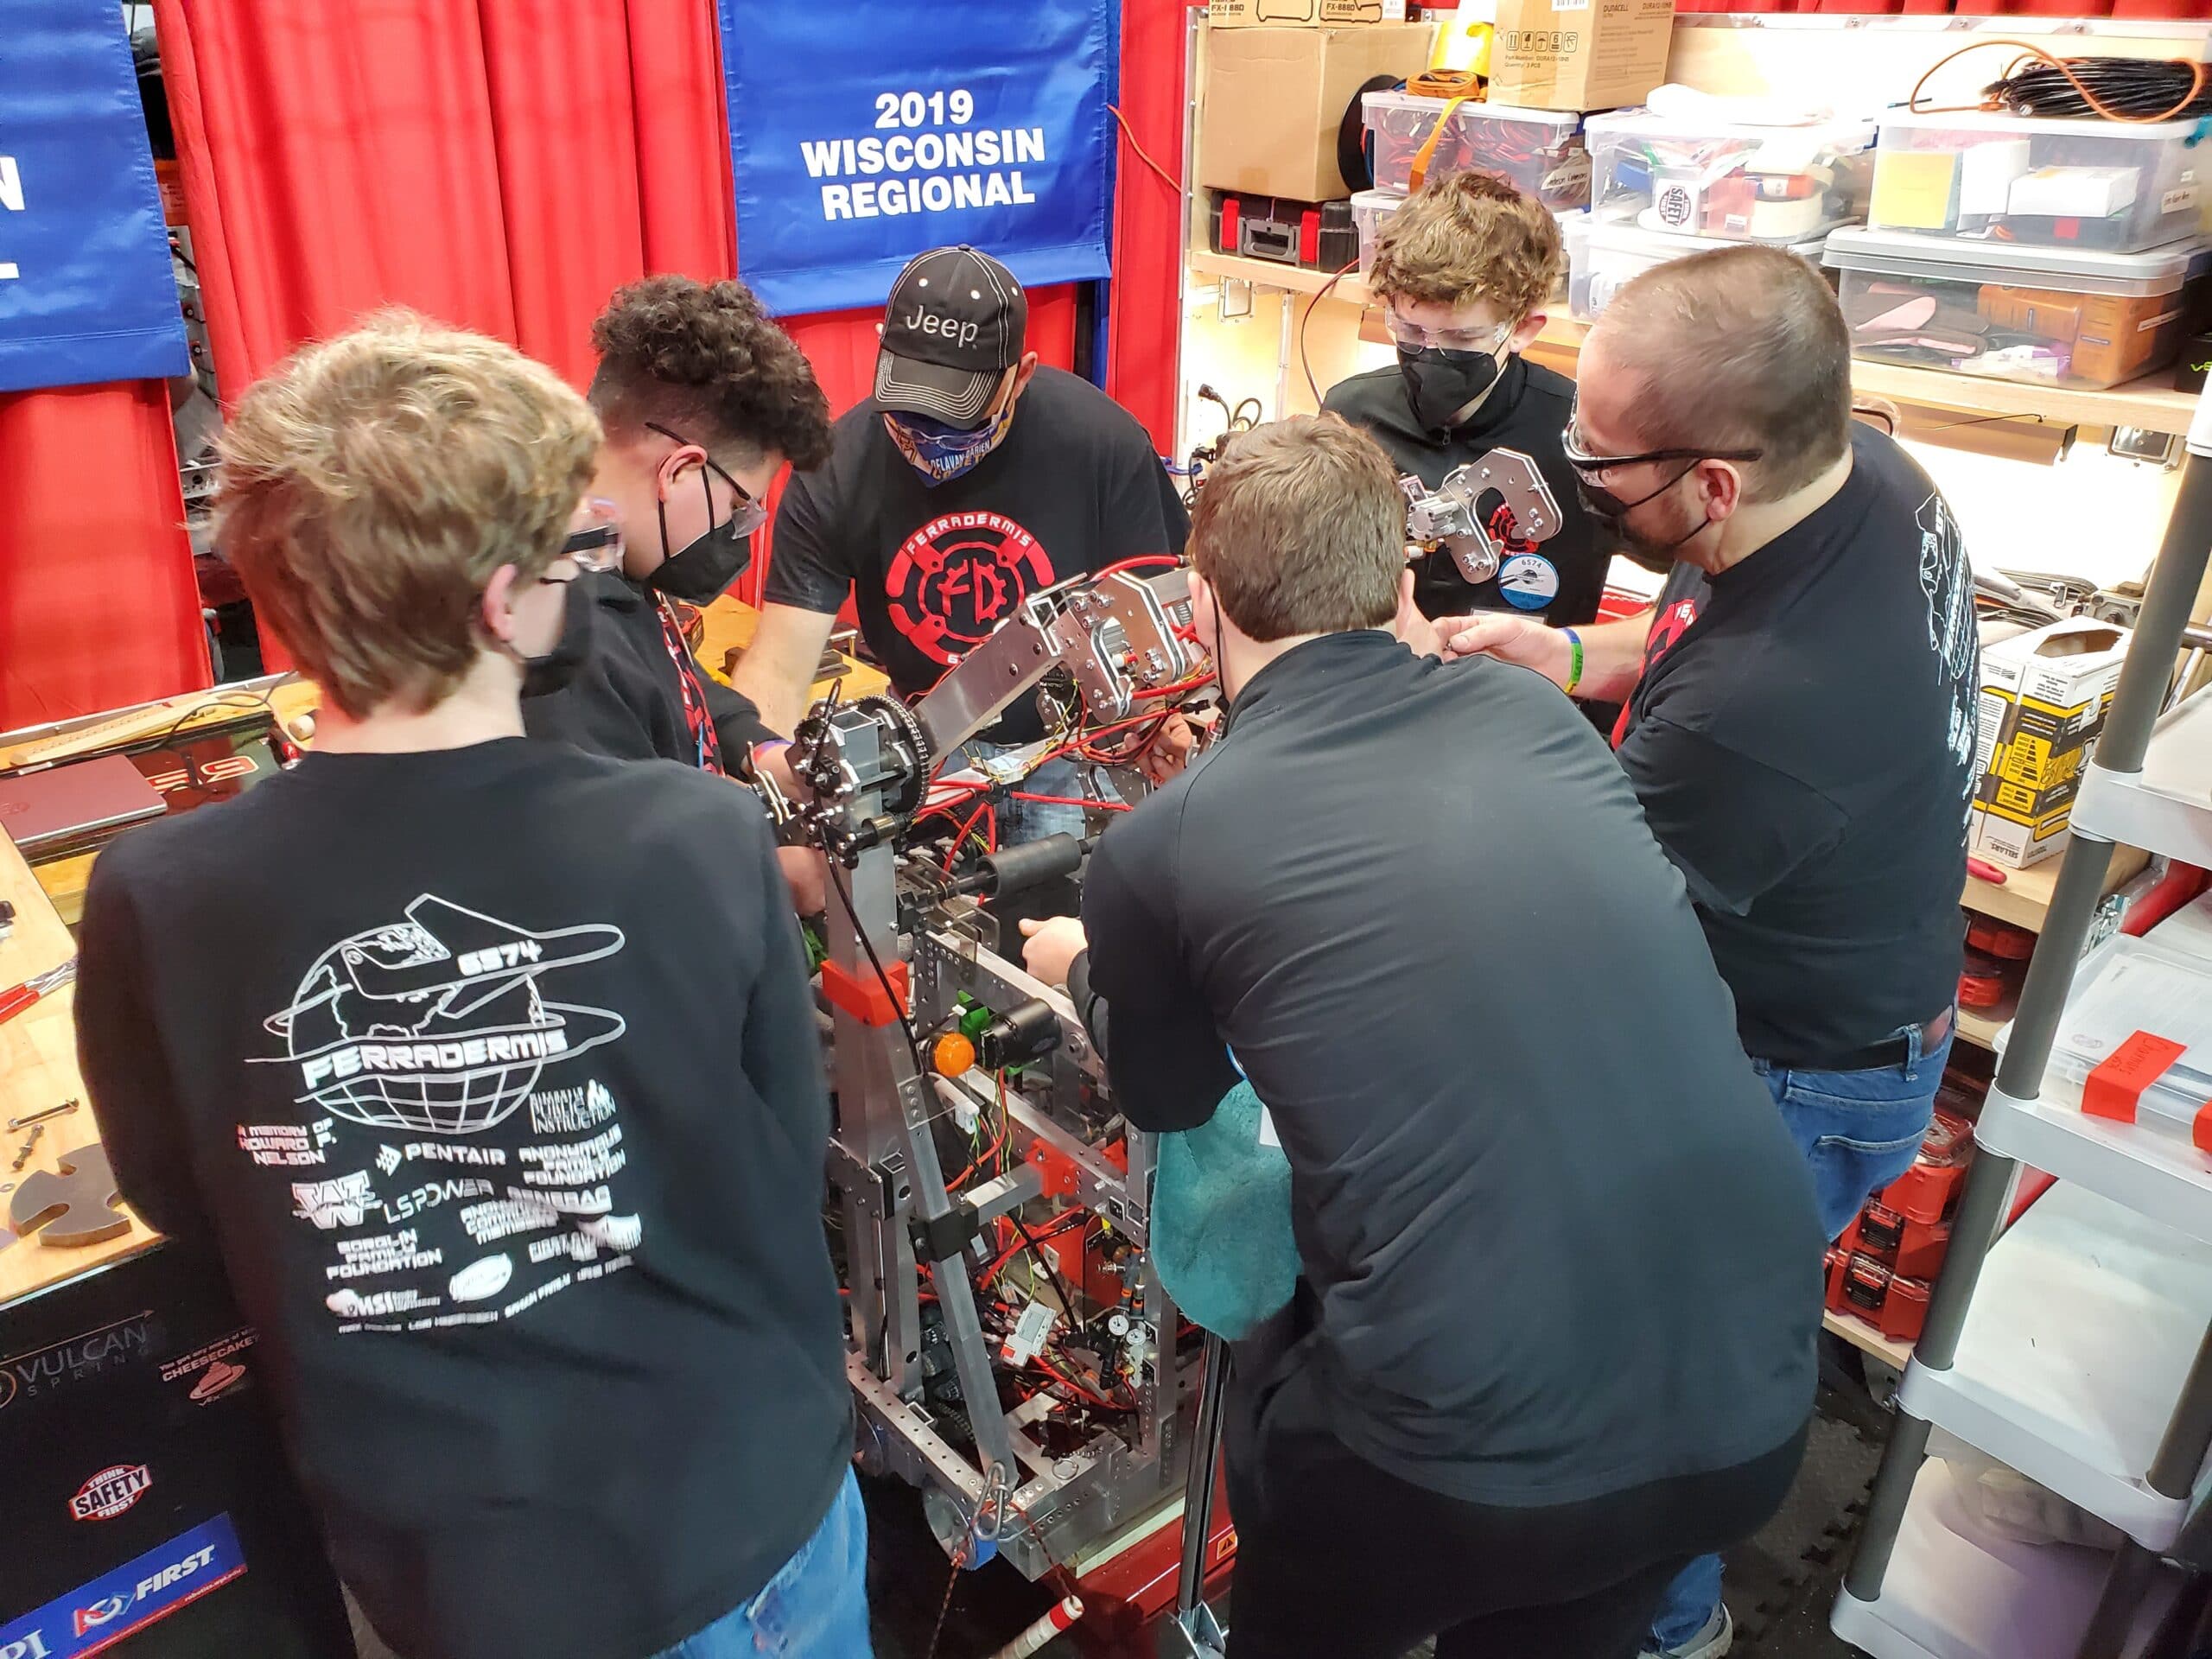 Working on the Robot in the Pit